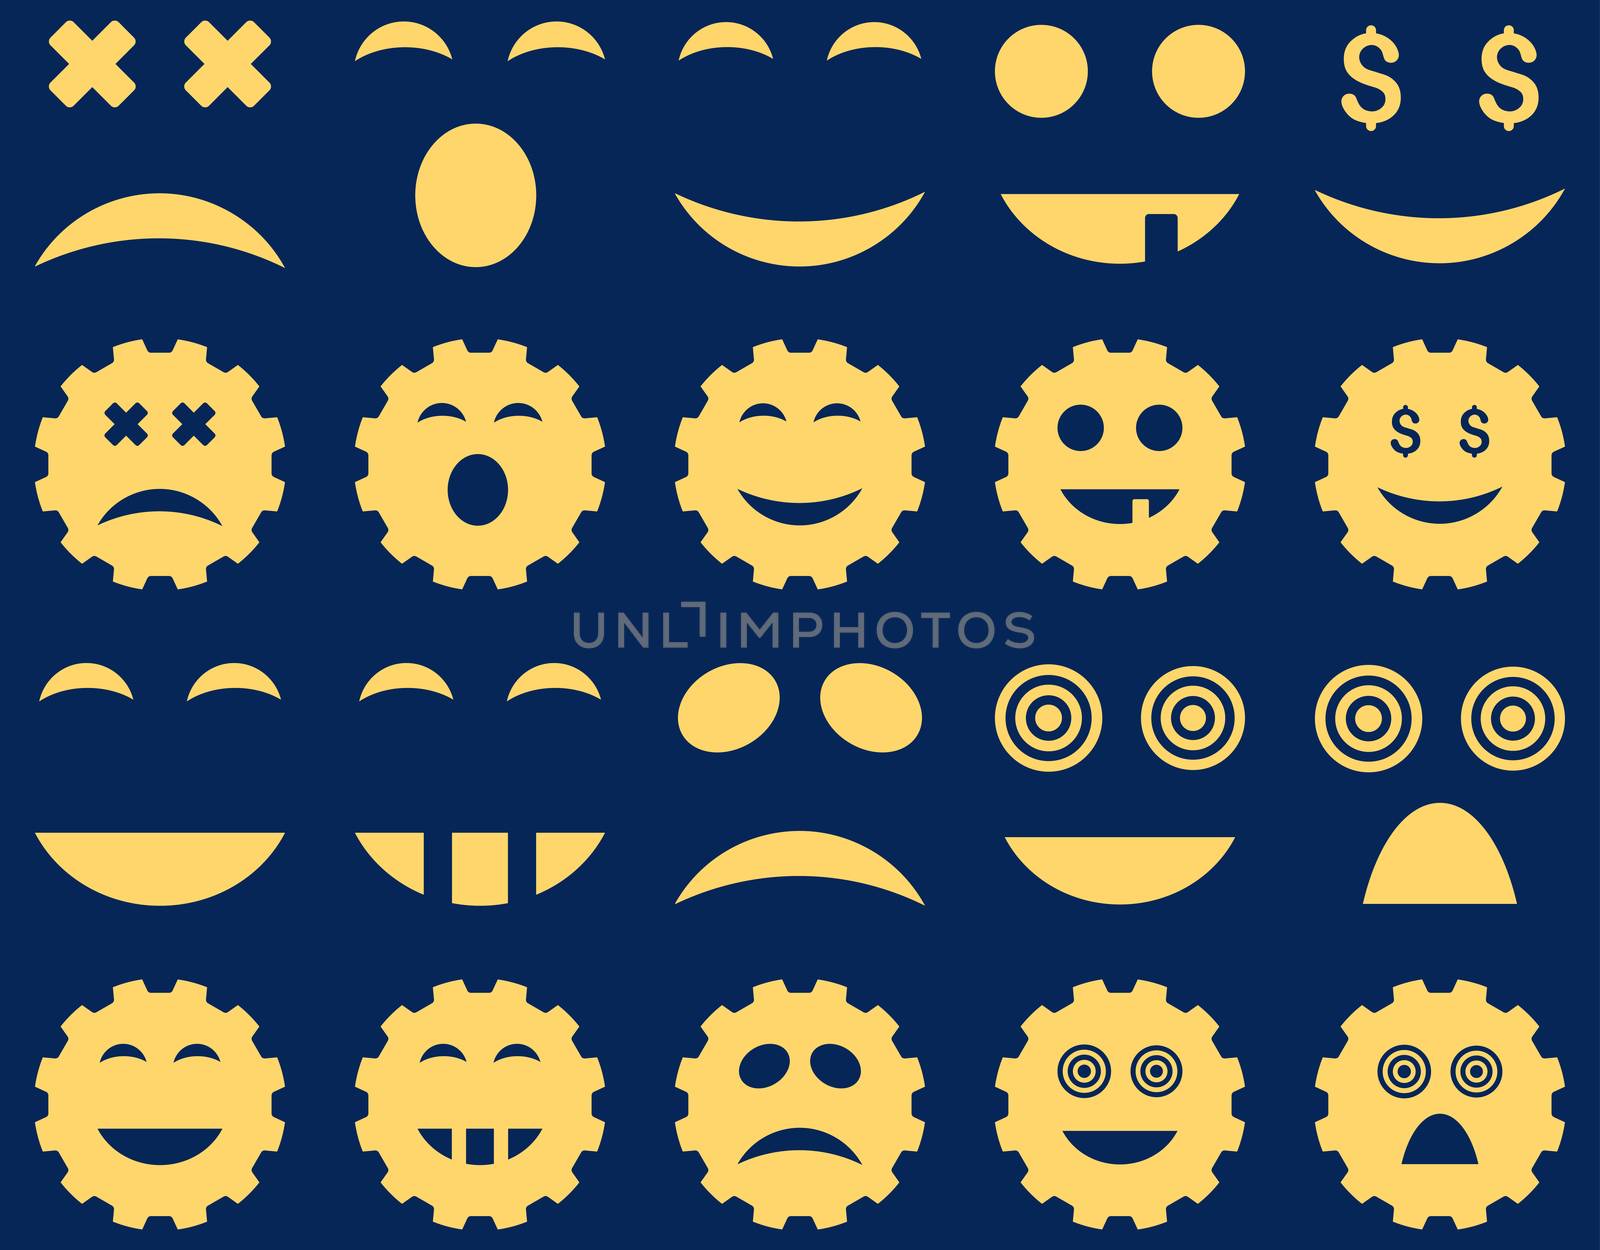 Tool, gear, smile, emotion icons. Glyph set style is flat images, yellow symbols, isolated on a blue background.